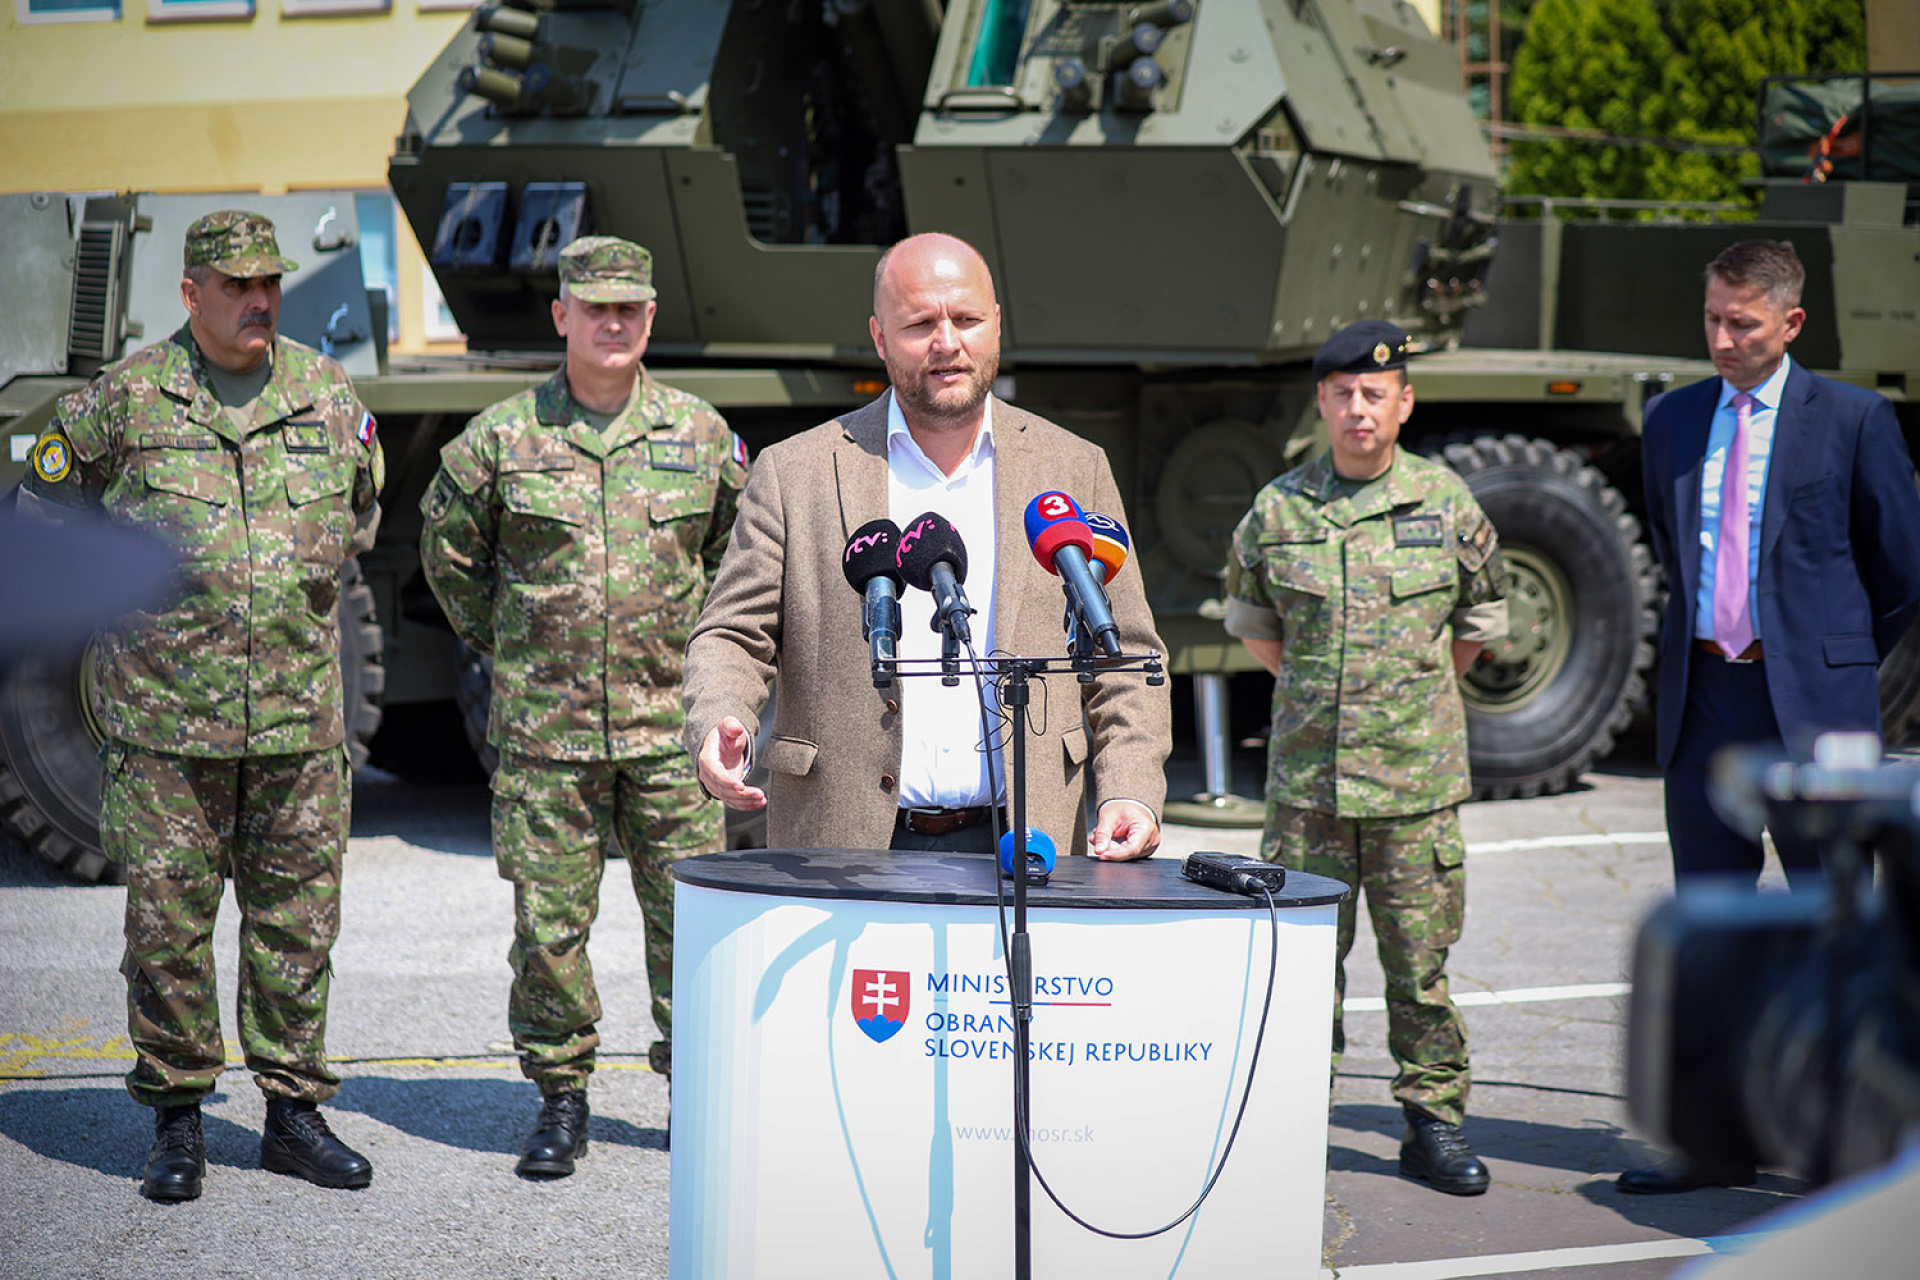 New ZUZANA 2 155mm Self-propelled Gun Howitzers Delivered for Slovak Ground Force